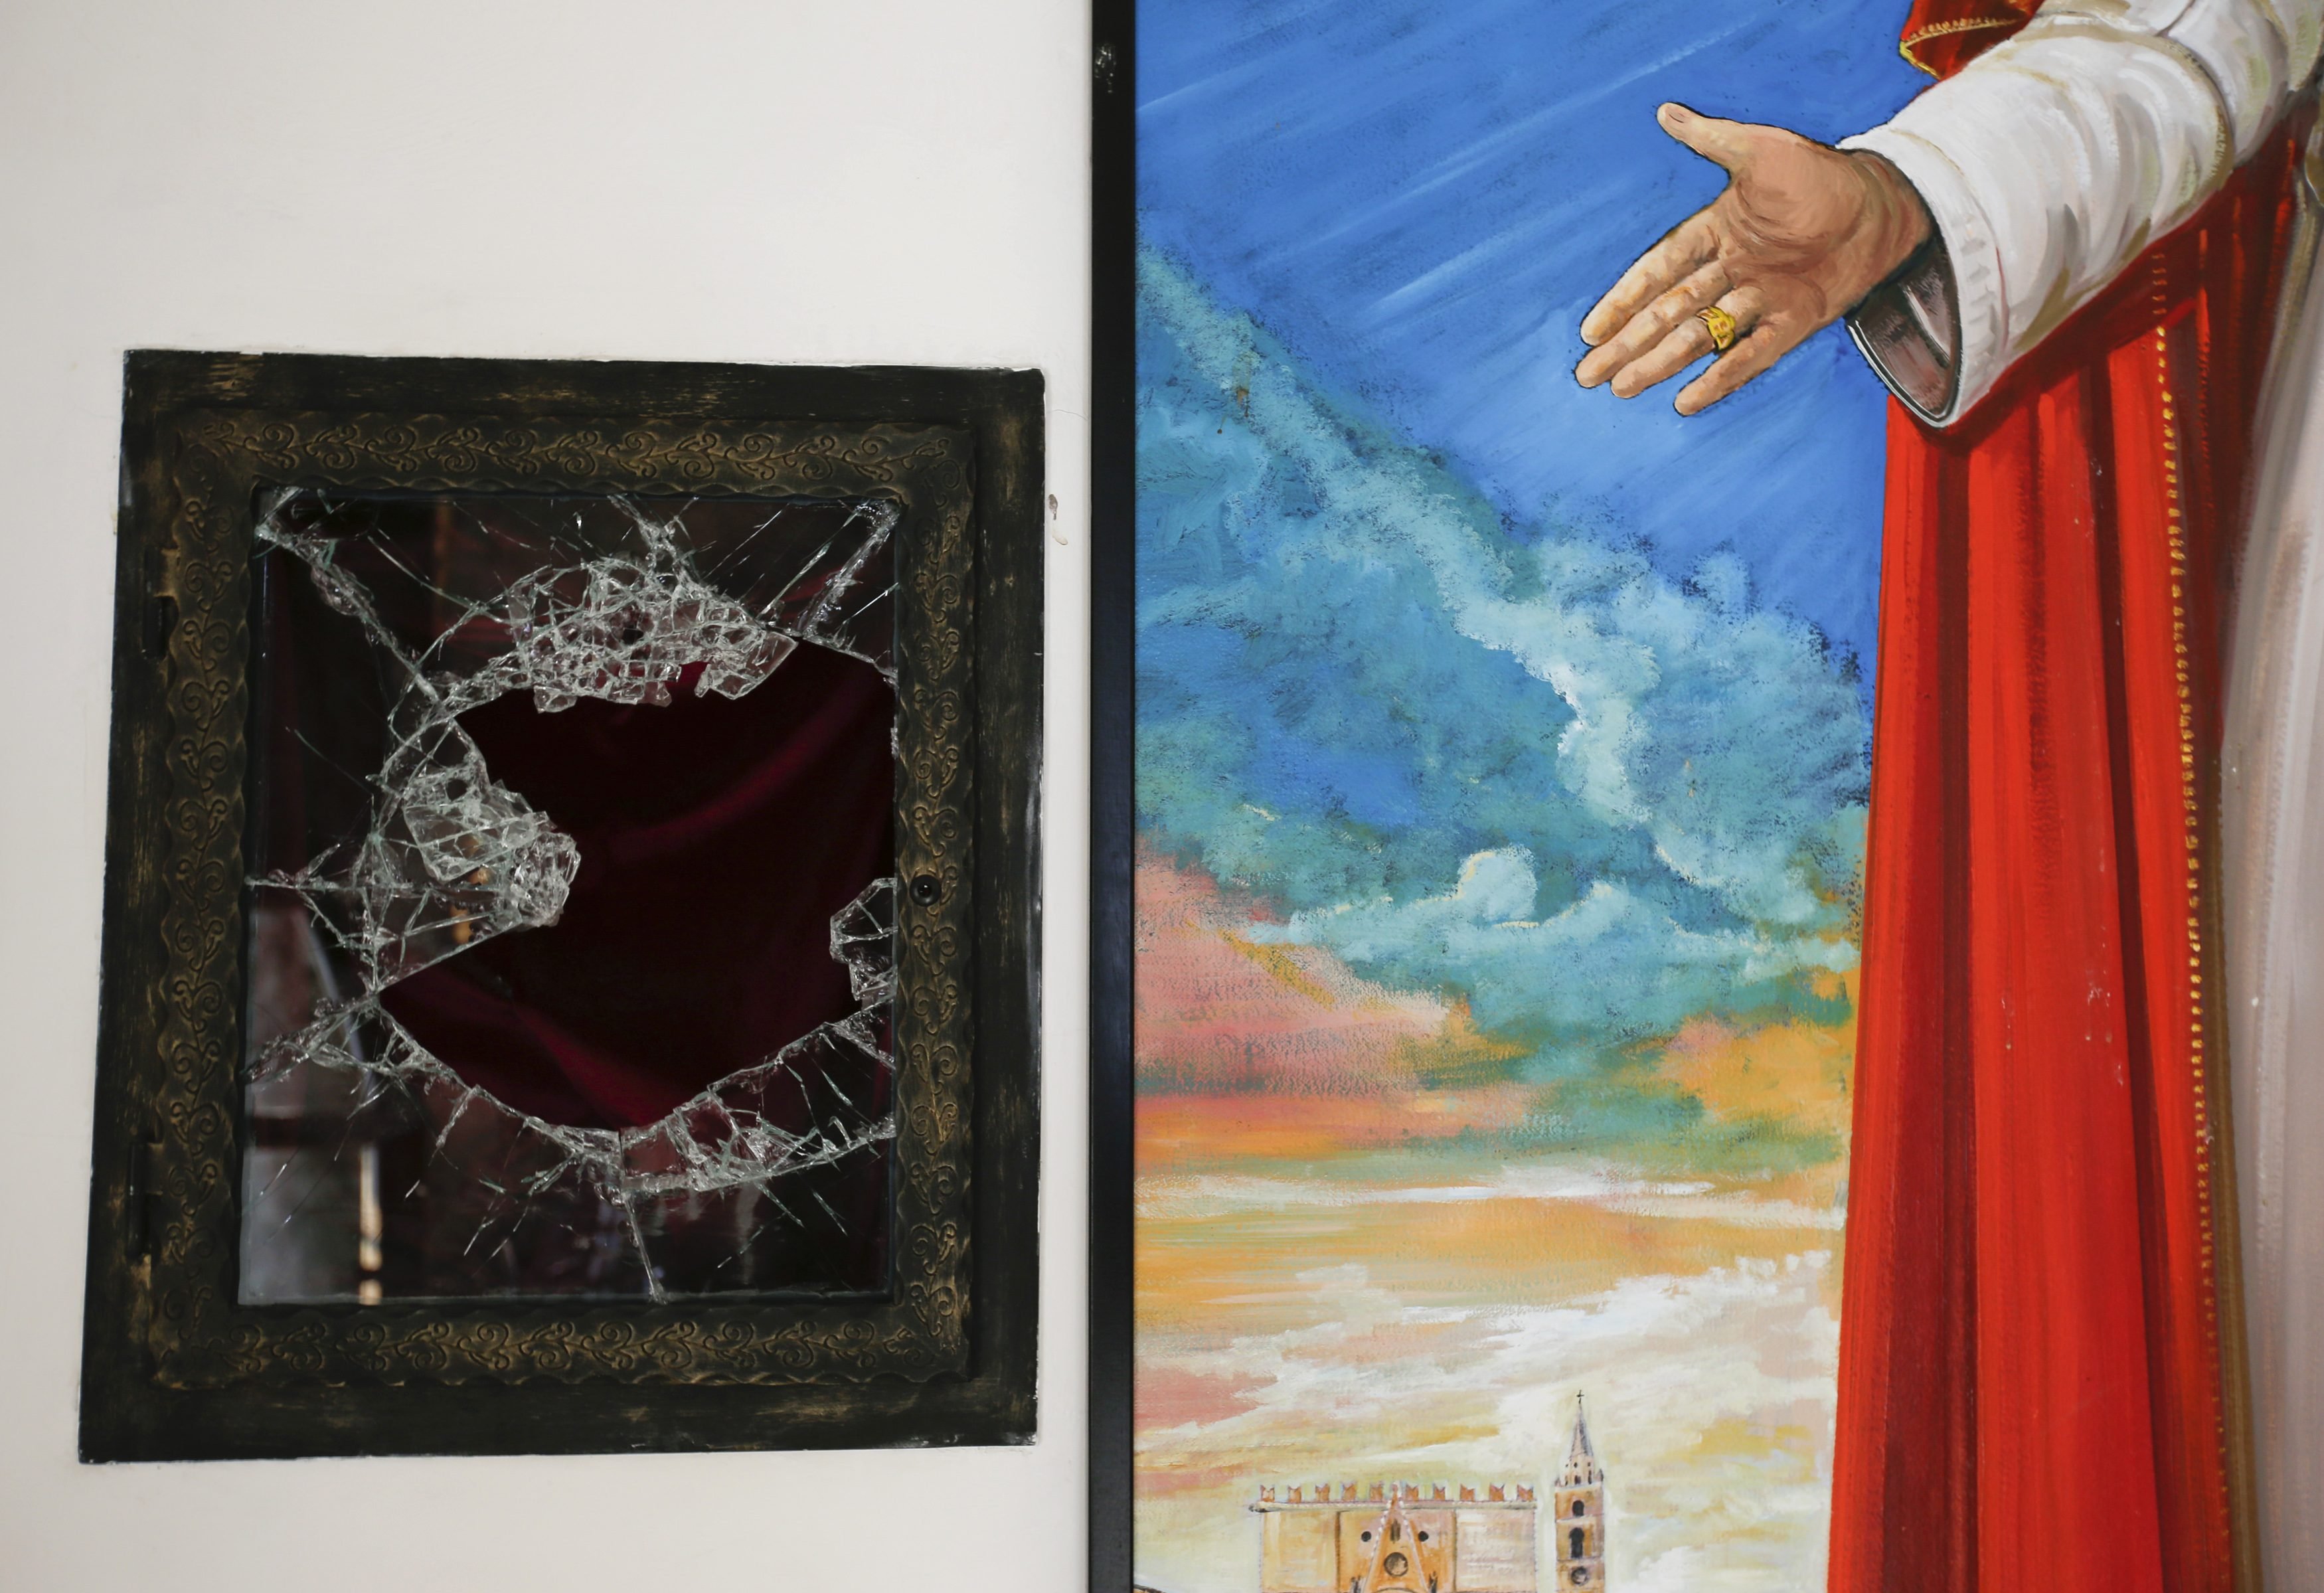 A broken glass of a niche where the reliquary with the blood of the late Pope John Paul II was located is seen next to a painting of the late Pope in the small mountain church of San Pietro della Ienca, near the city of L'Aquila Jan. 28, 2014 .Thieves broke into a small church in the mountains east of Rome and stole the reliquary with the blood of the late Pope John Paul II, a custodian said.